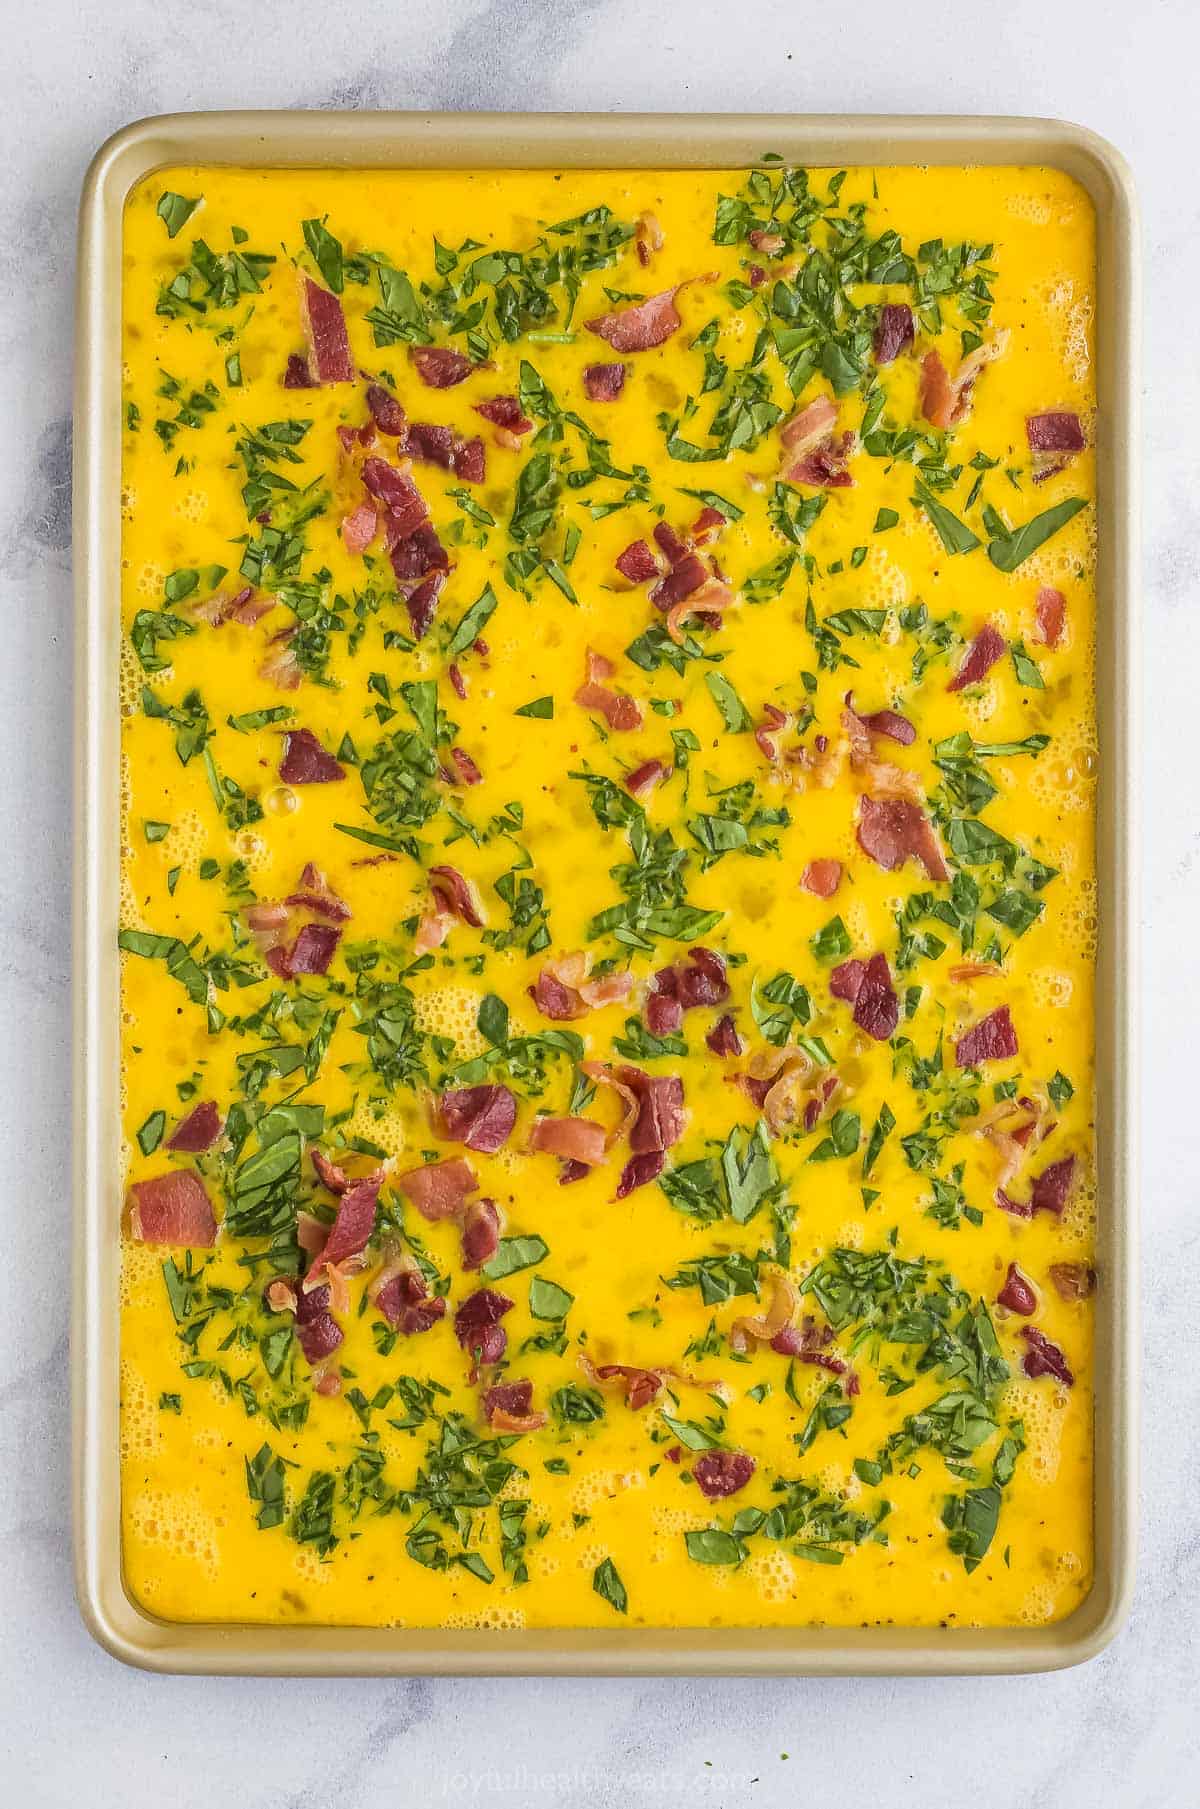 The baking sheet full of frittata batter after the bacon has been added